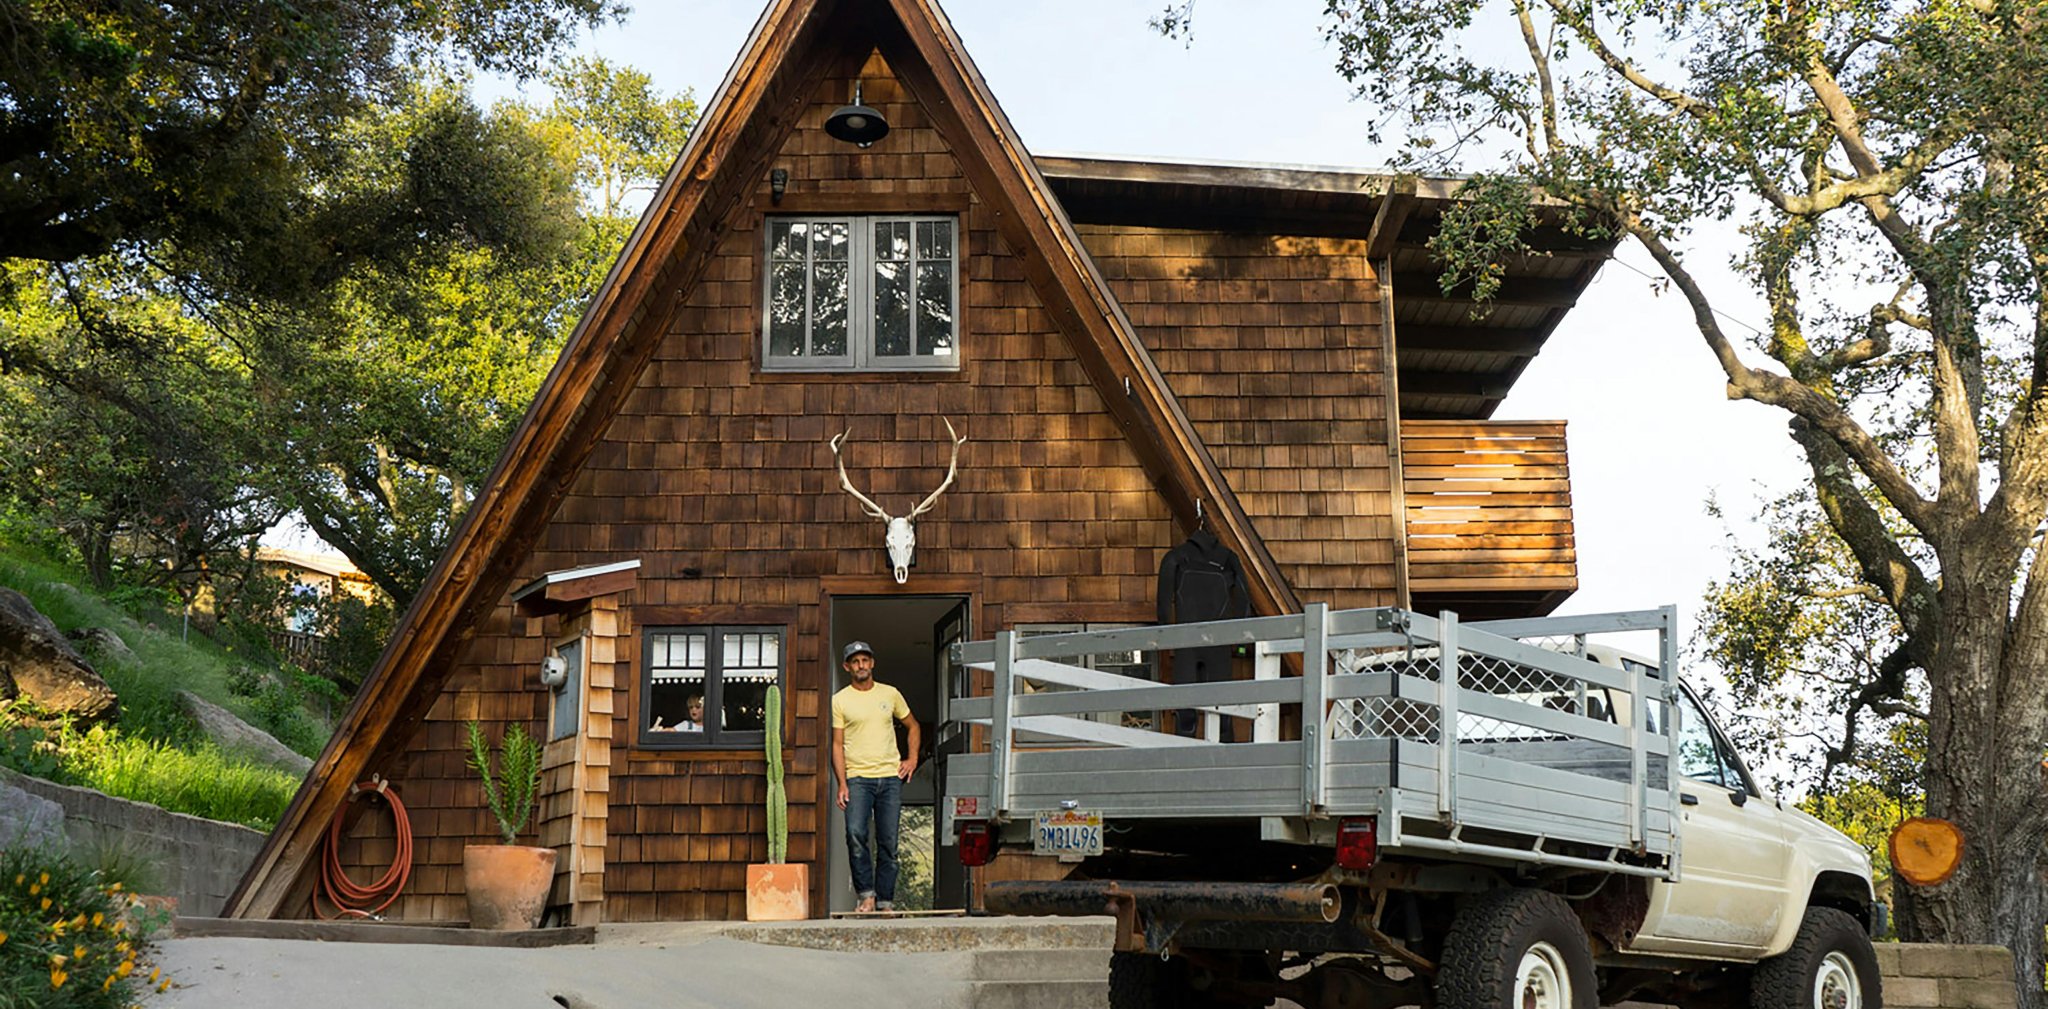 What Makes A Proper Surf Shack?